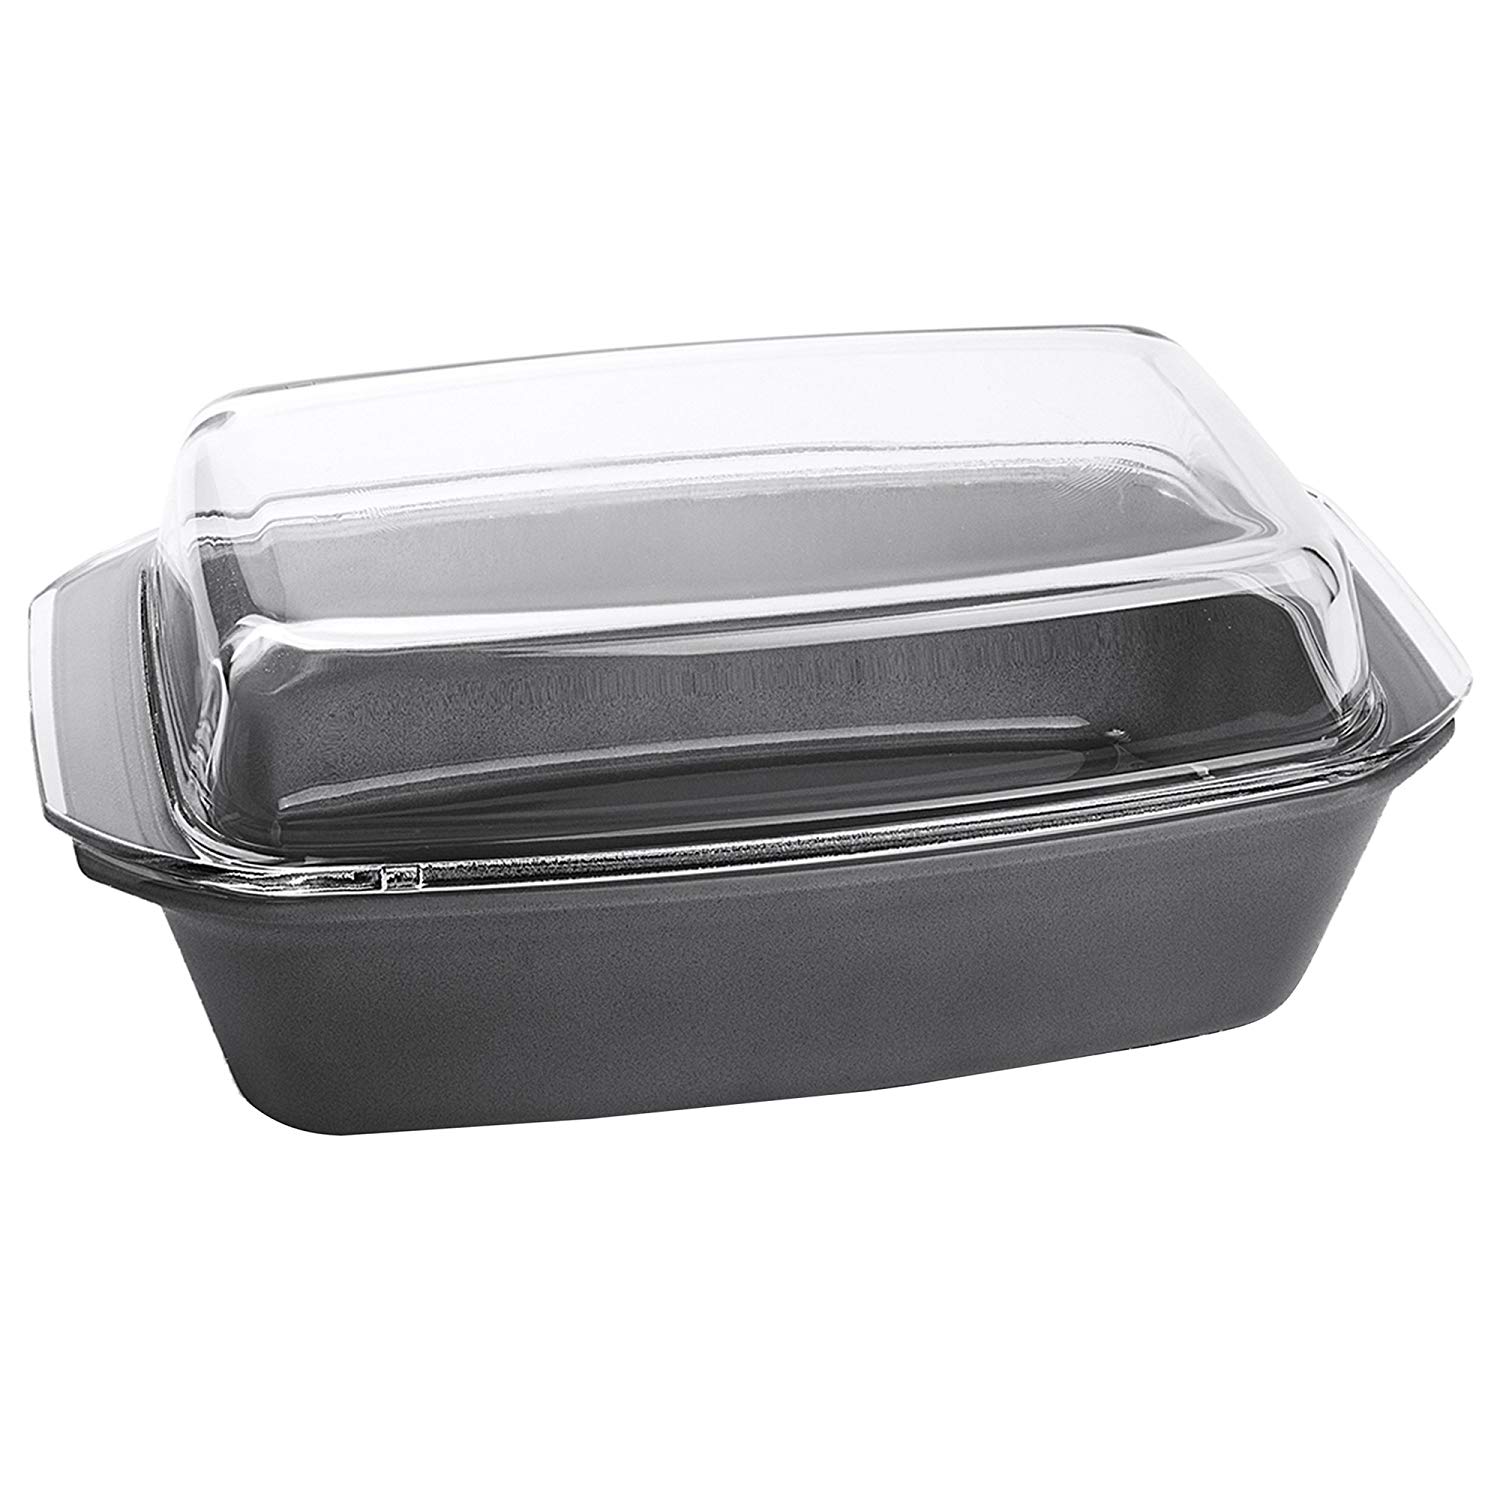 Bohemia Cristal Simax 093/006/031 Bowl Square Approx. 2.8 Litres. With High